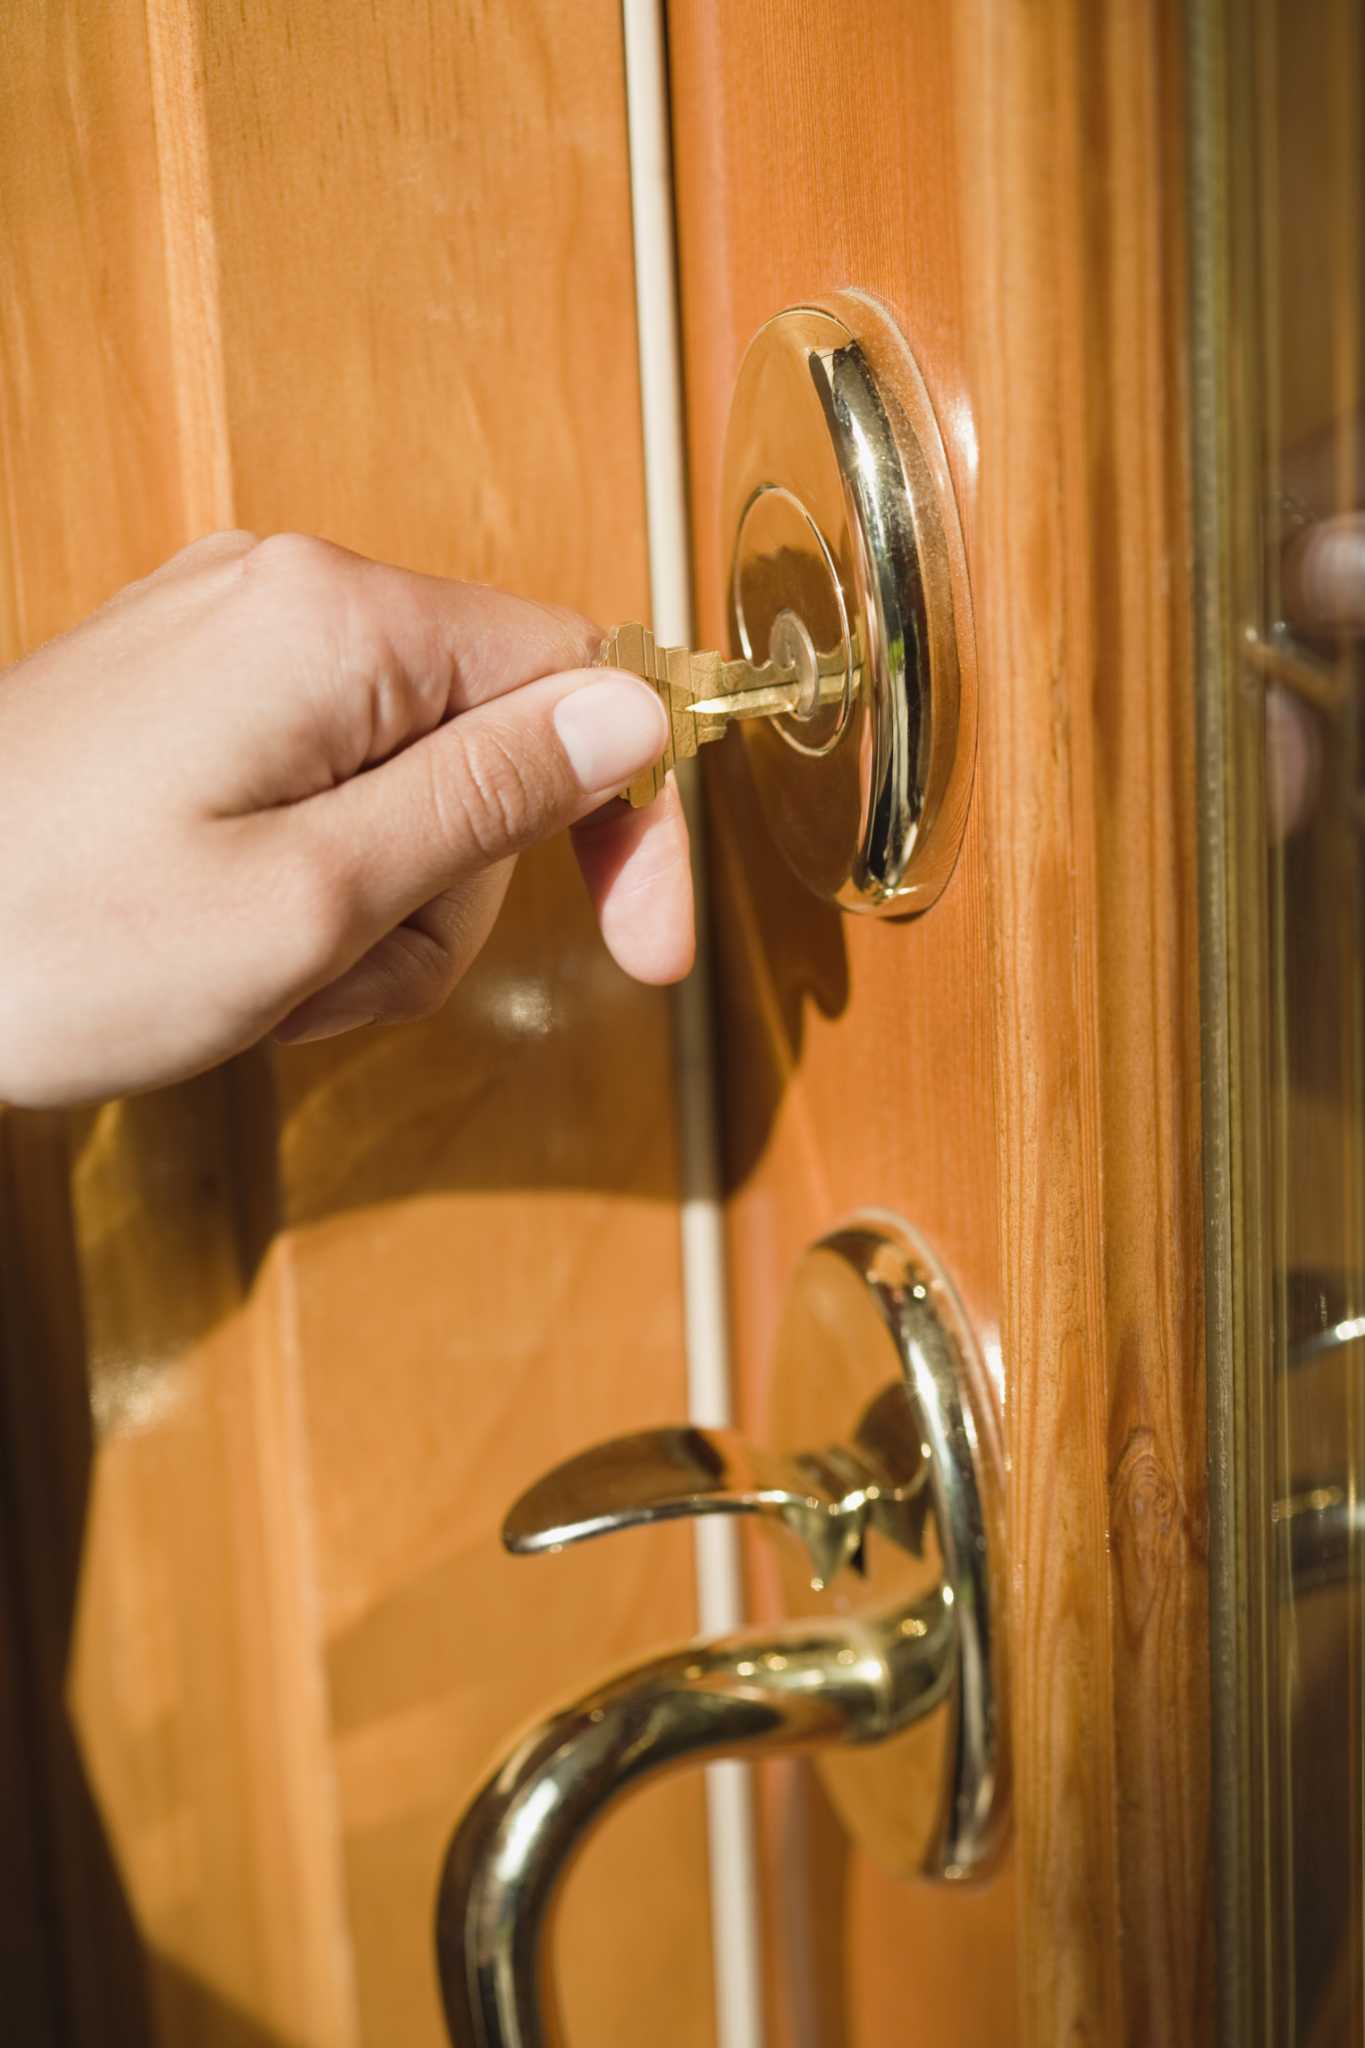 How to Install a Deadbolt Lock on a Door Without Cutouts